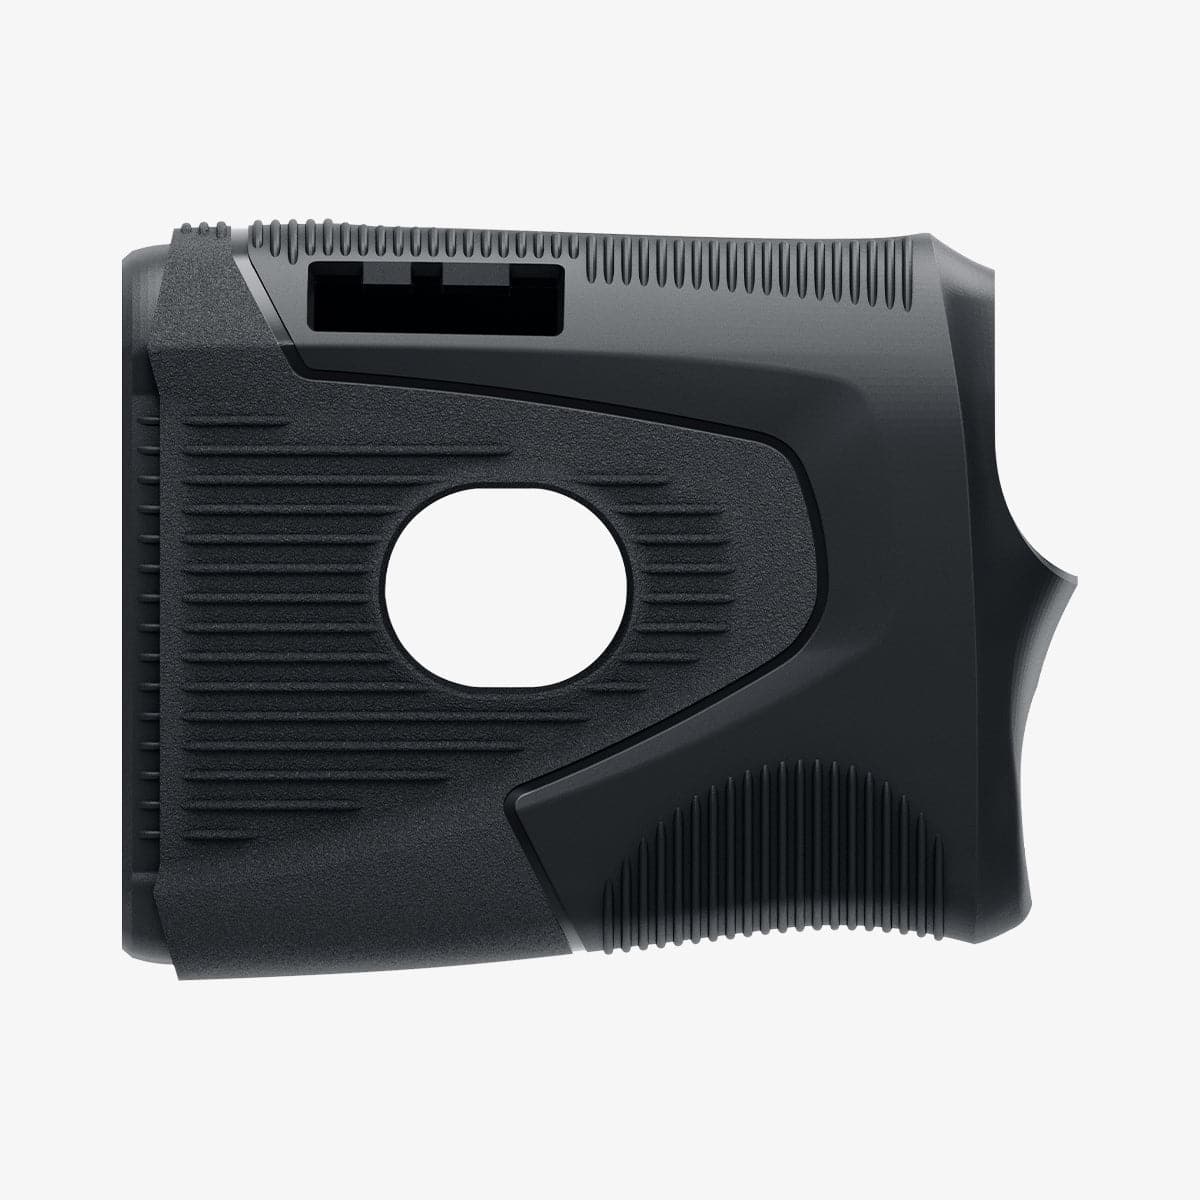 ACS04228 - Bushnell Pro XE Rangefinder AirTag Case in black showing the side with no rangefinder inside